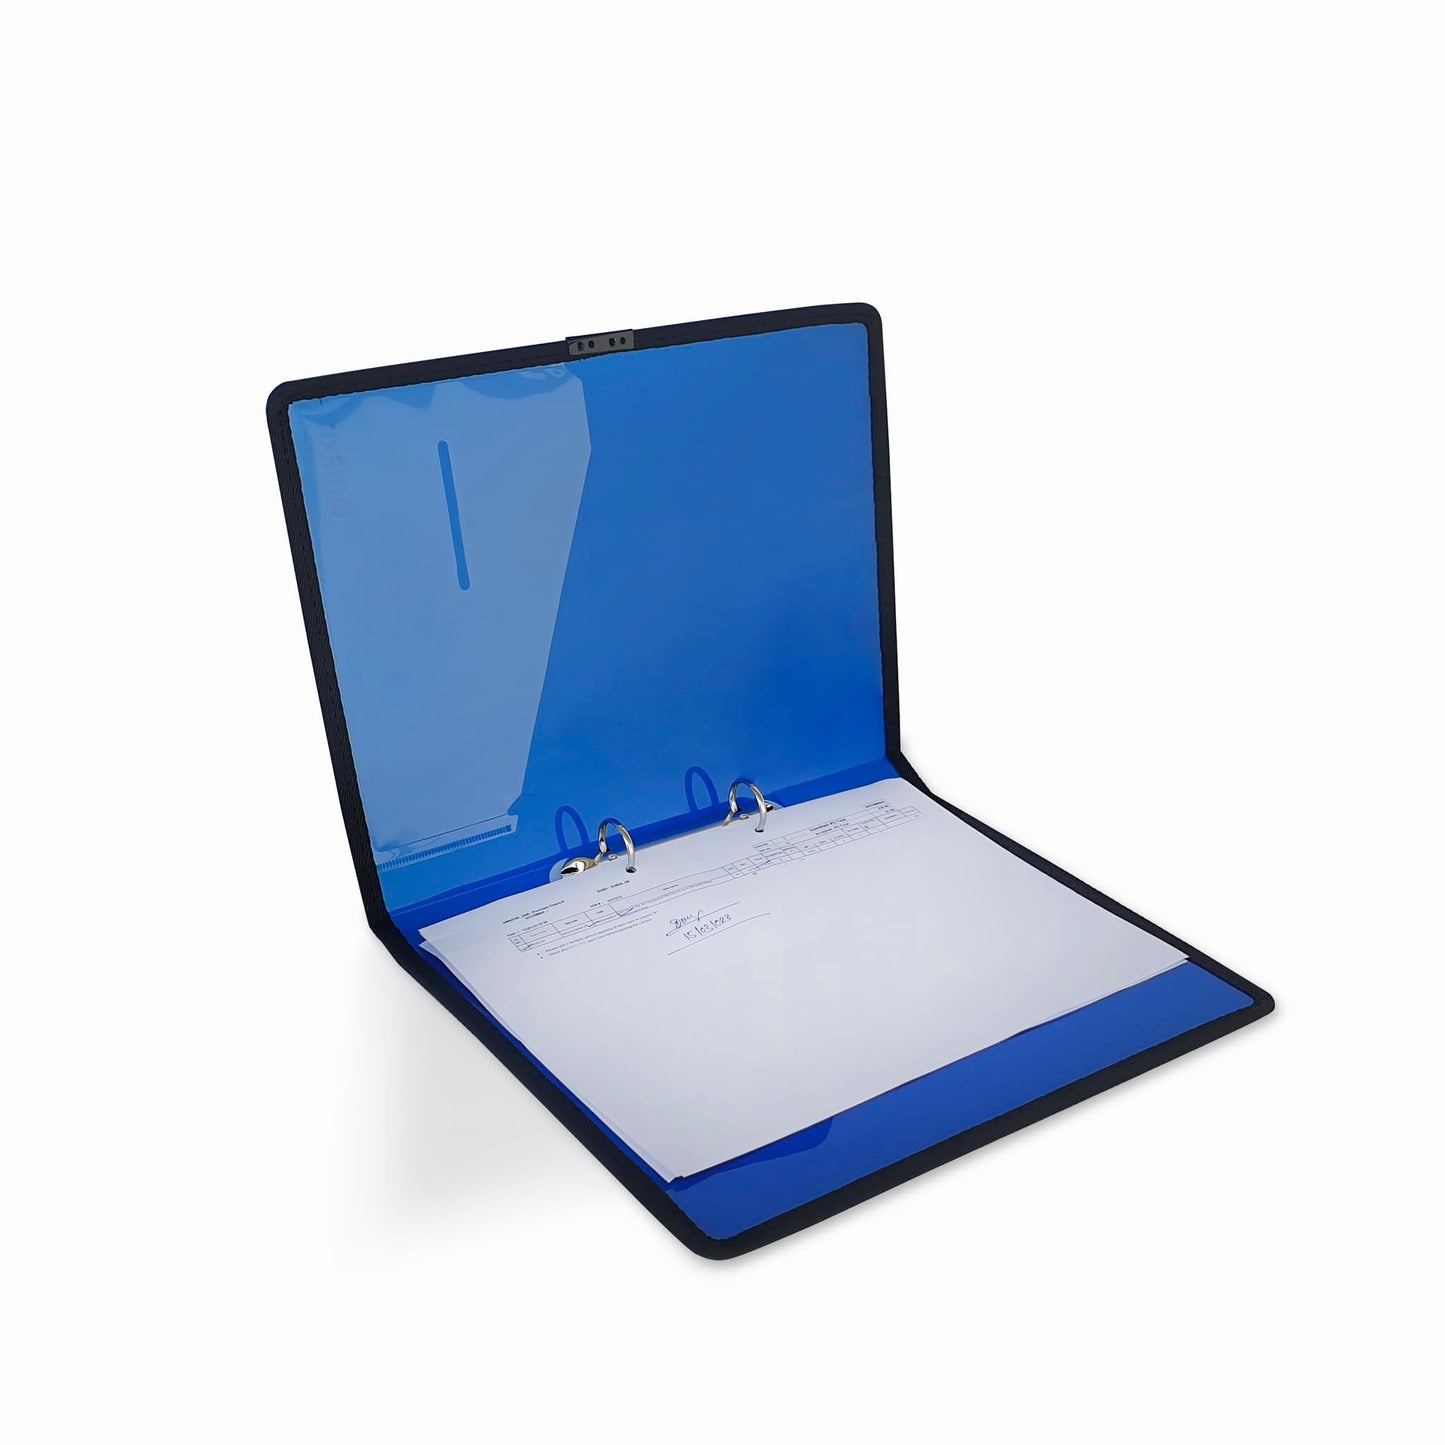 Maxi A4 Ring Binder With 2 Ring Translucent Blue, waterproof, dust-proof, very practical, and reusable